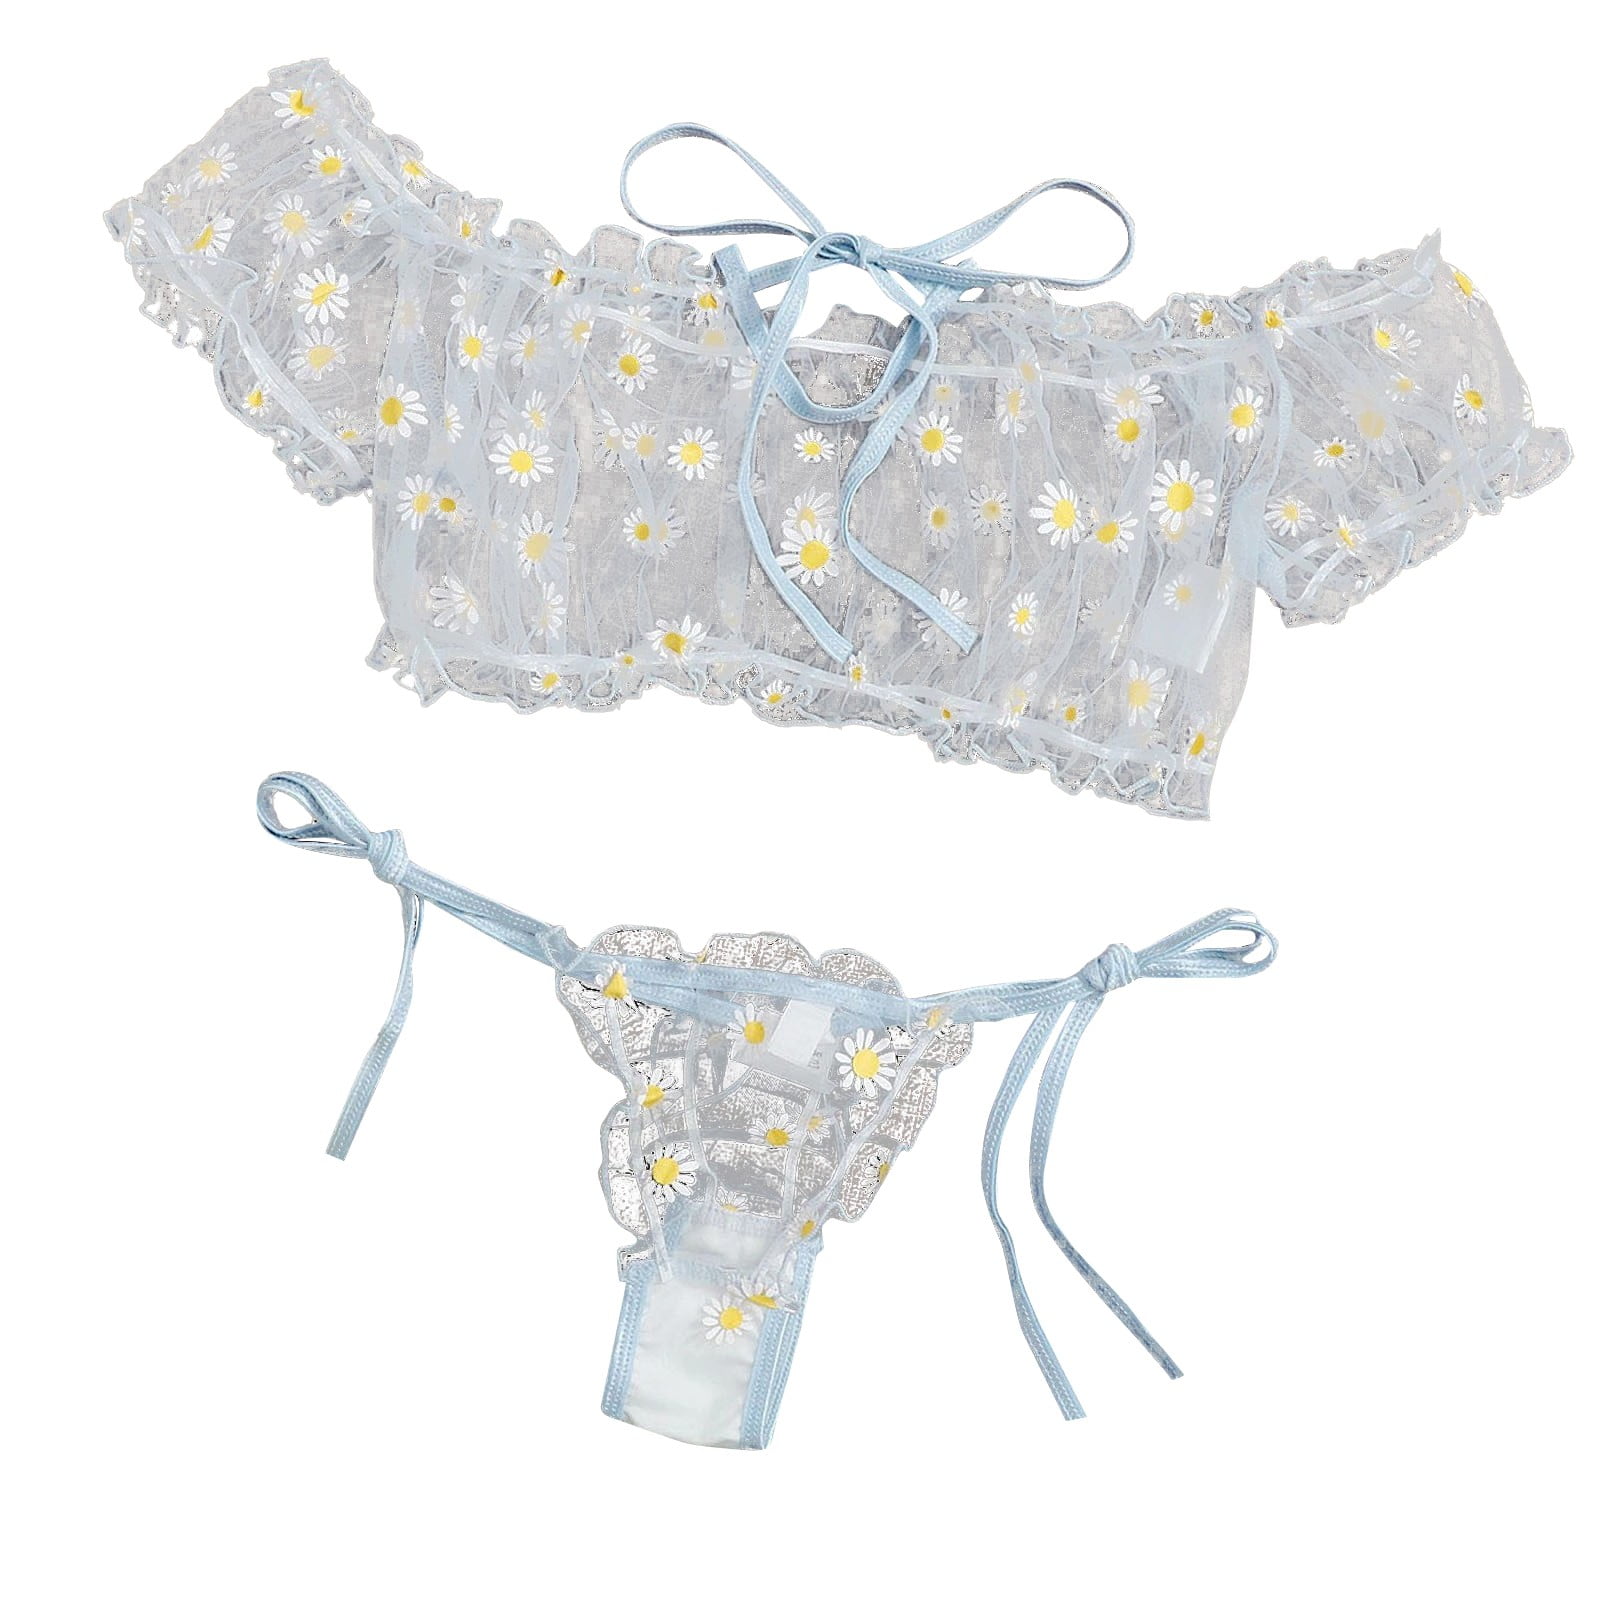 YDKZYMD Wedding Lingerie Set Mesh Embroidered Floral Plus Size Sexy Bra and  Panty Sets for Women Light blue S 